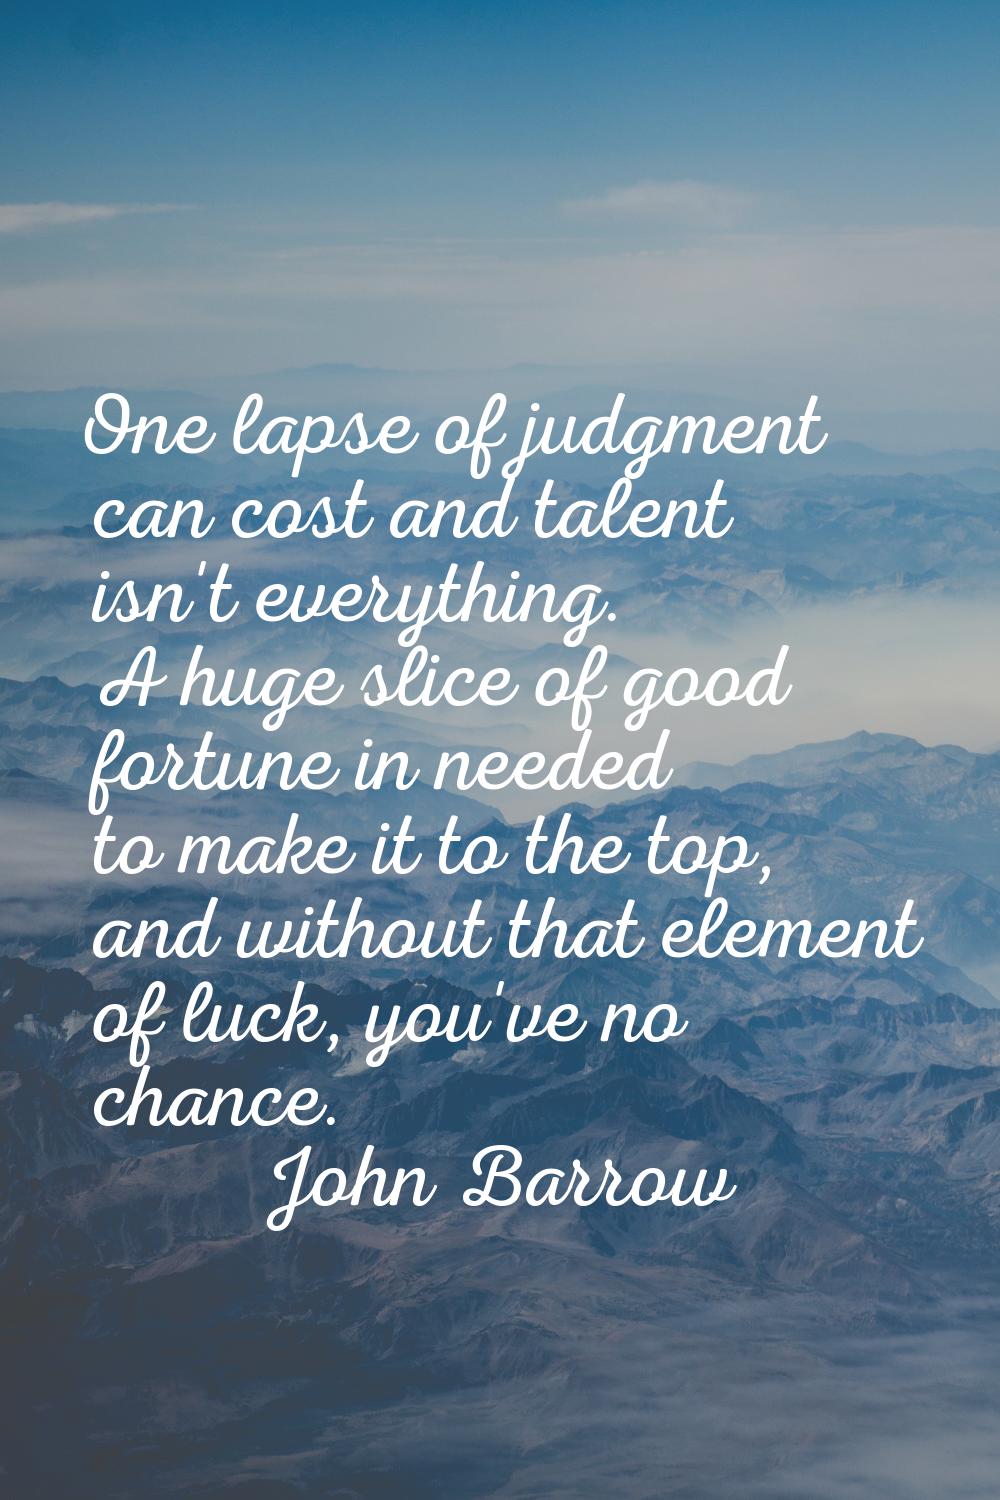 One lapse of judgment can cost and talent isn't everything. A huge slice of good fortune in needed 